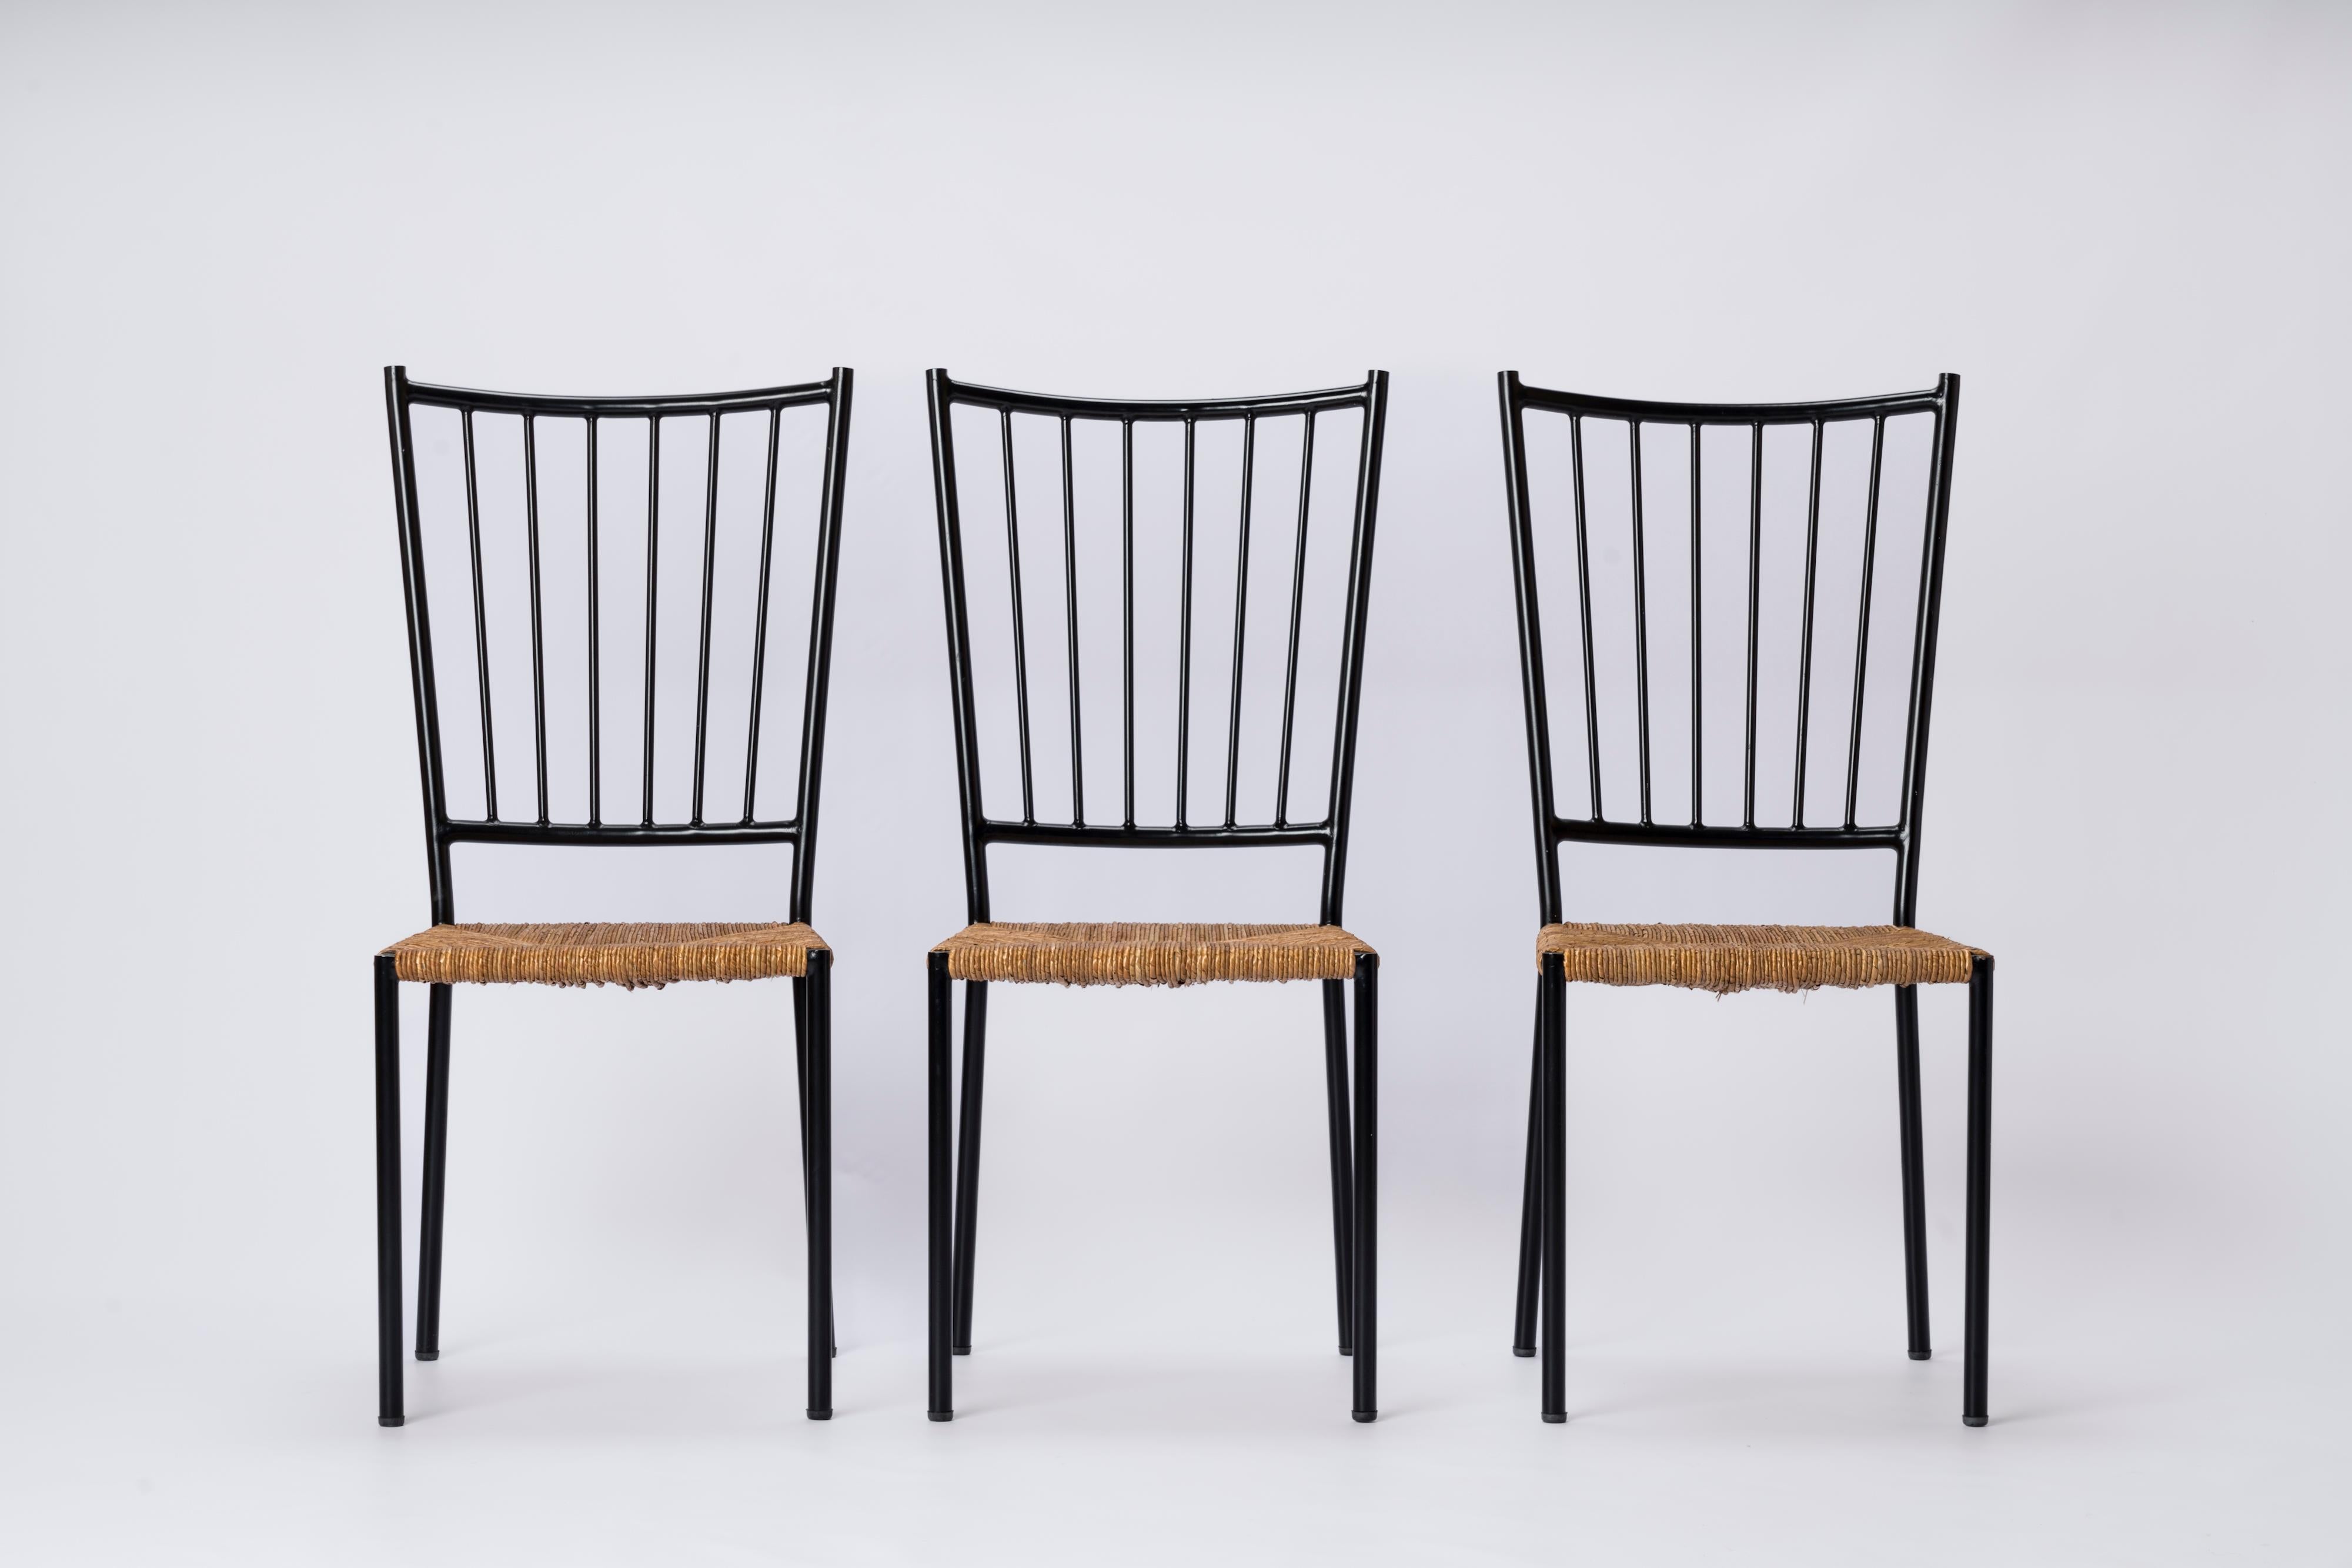 Rare set of six chairs by Colette Gueden. The iconic French designer behind the 